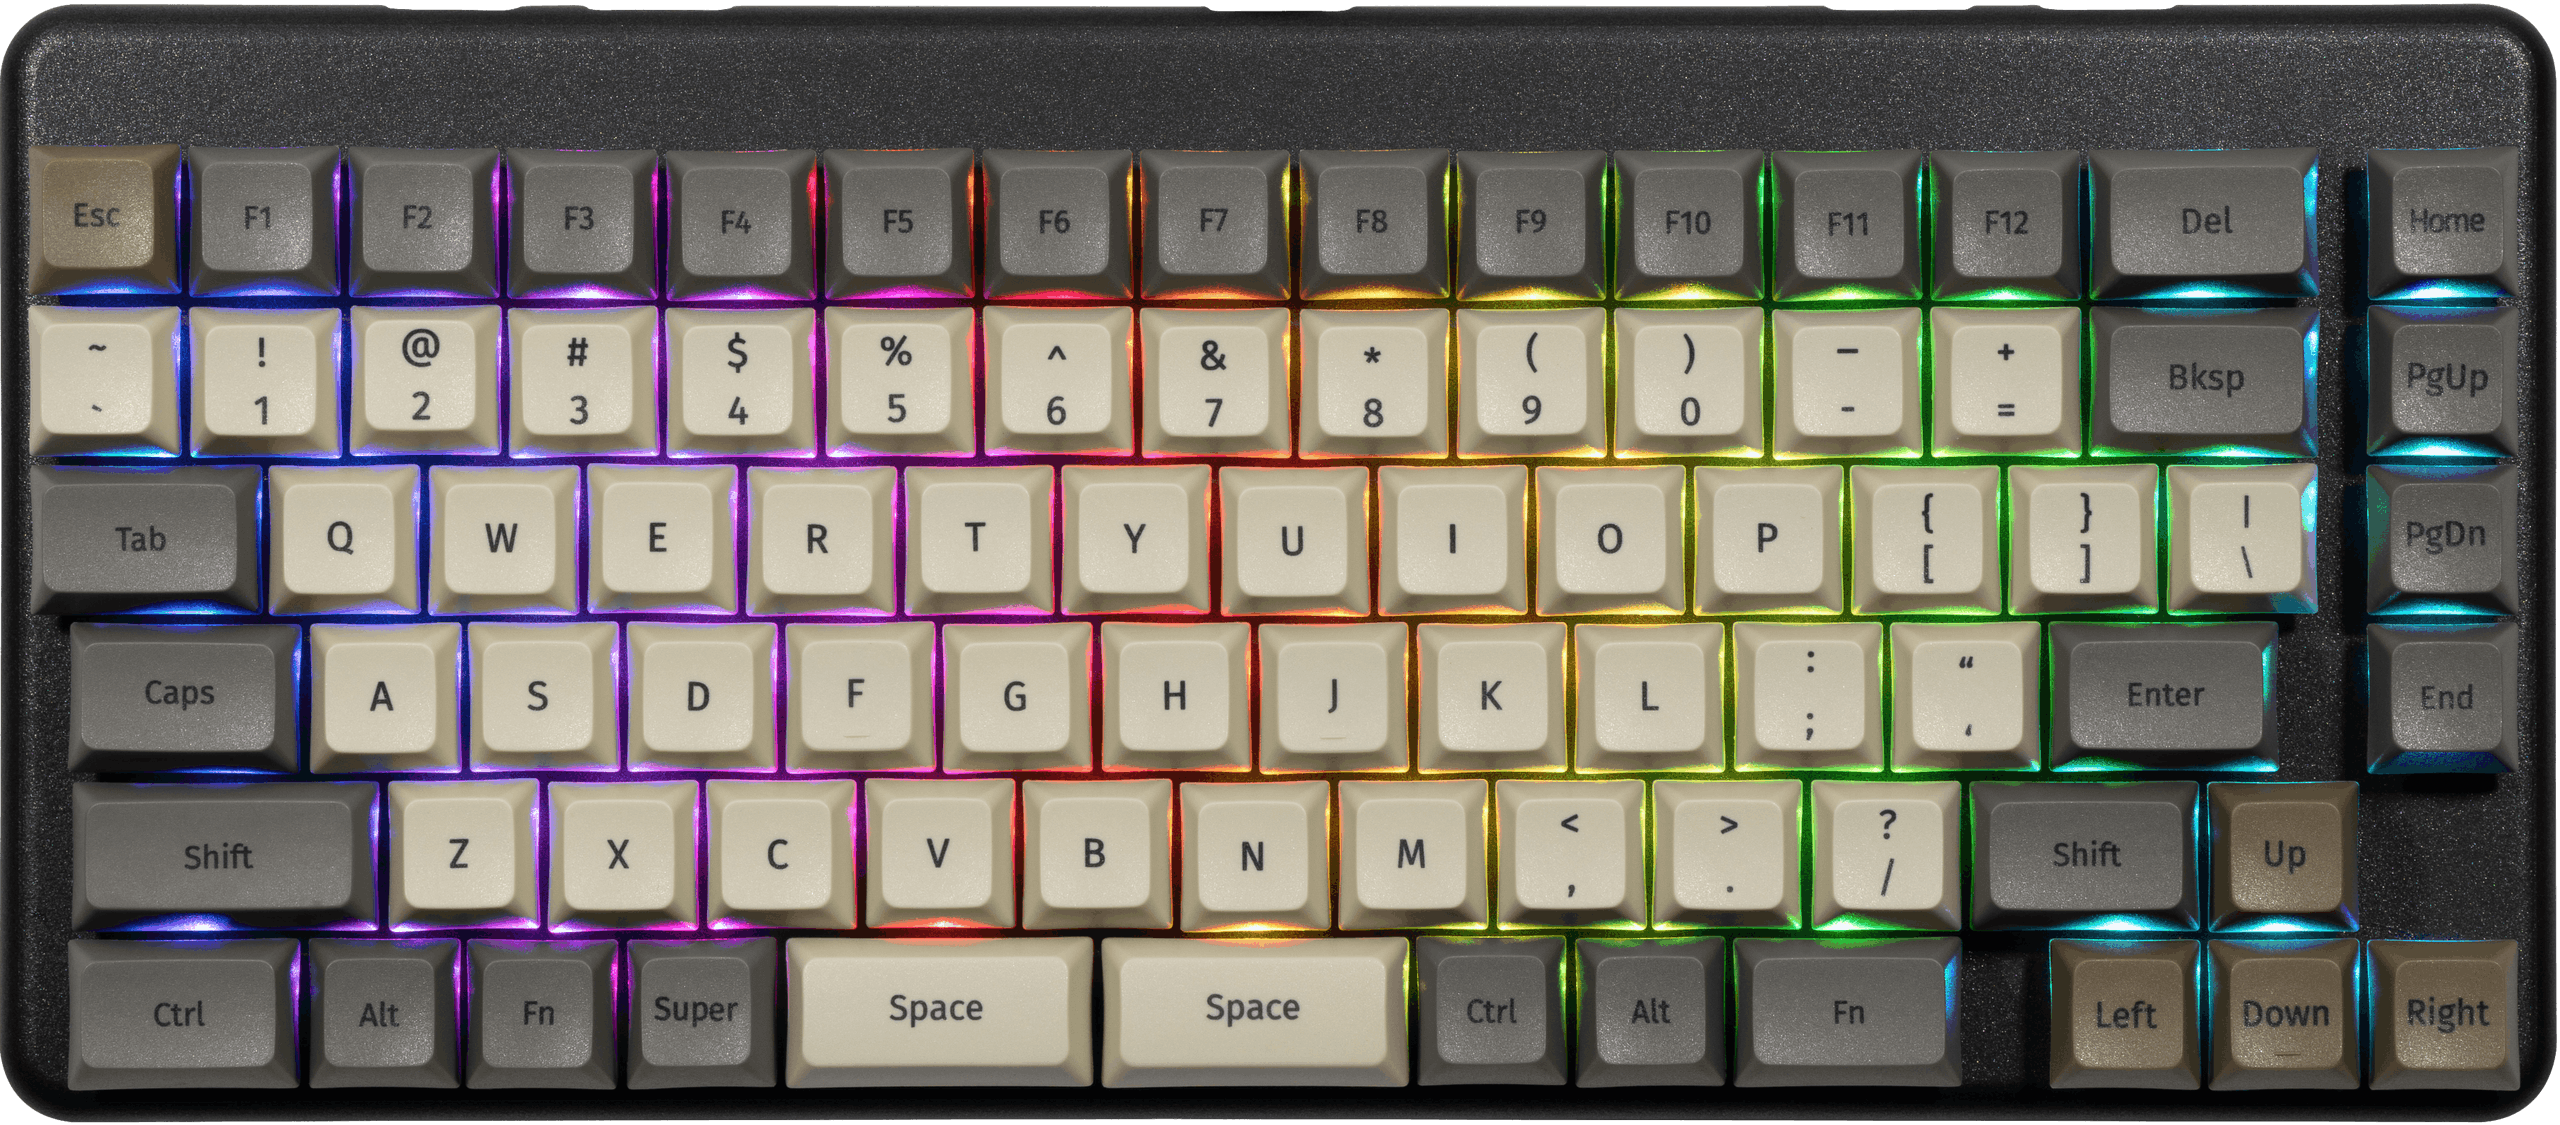 The Launch keyboard layout mainly differs from other keyboards in the arrangement of the bottom row keys, from left to right: Ctrl, Alt, Fn, Super, the split spacebar, Ctrl, Alt, Fn.